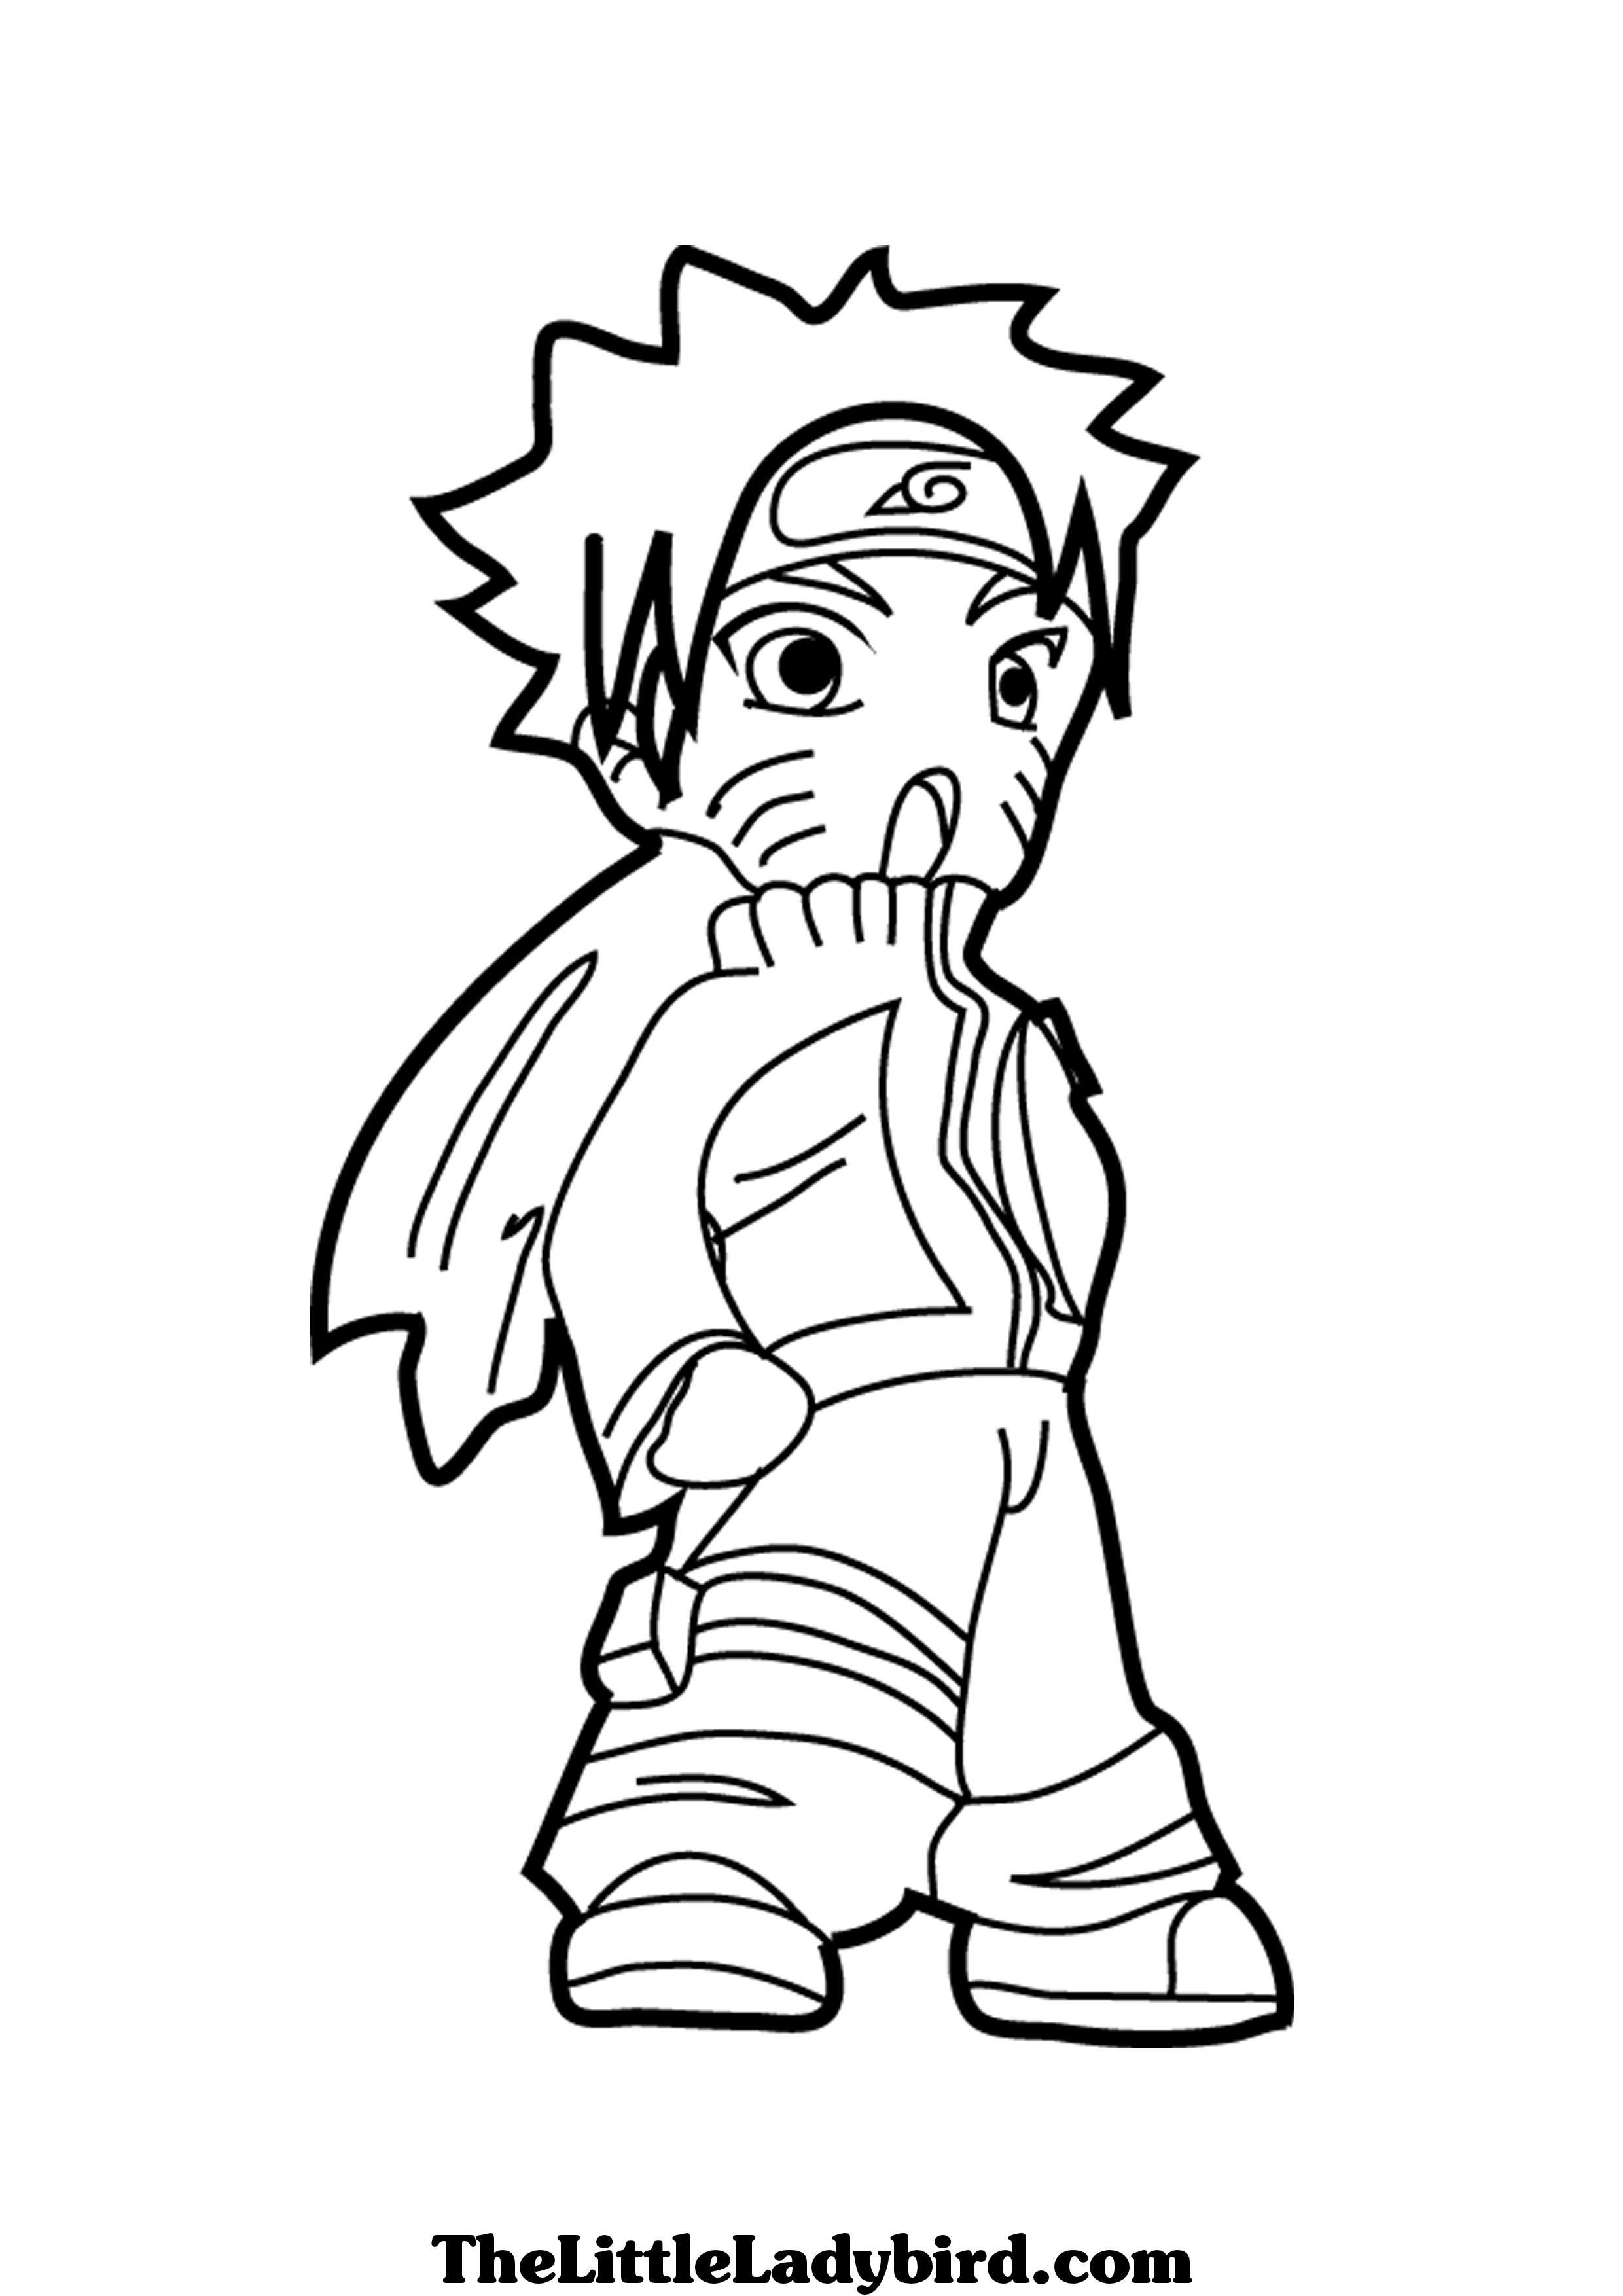 Awesome Photo of Anime Naruto Coloring Pages - vicoms.info